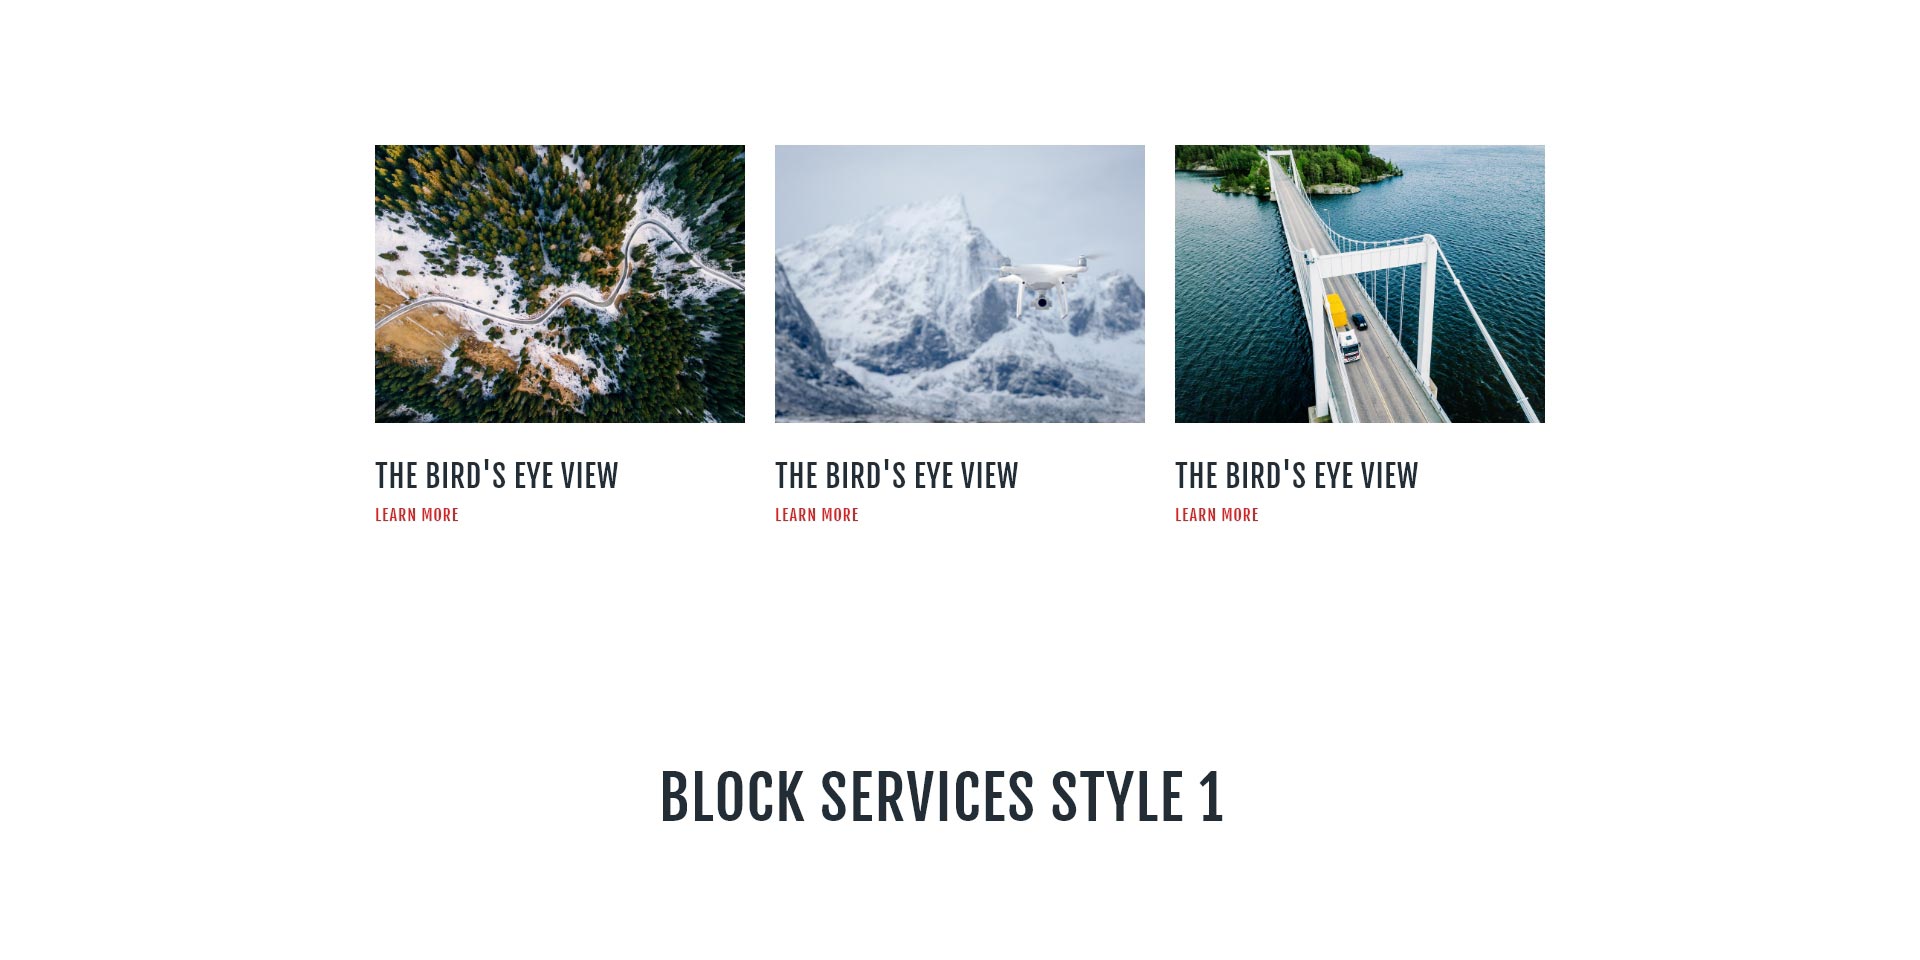 Block services style 1